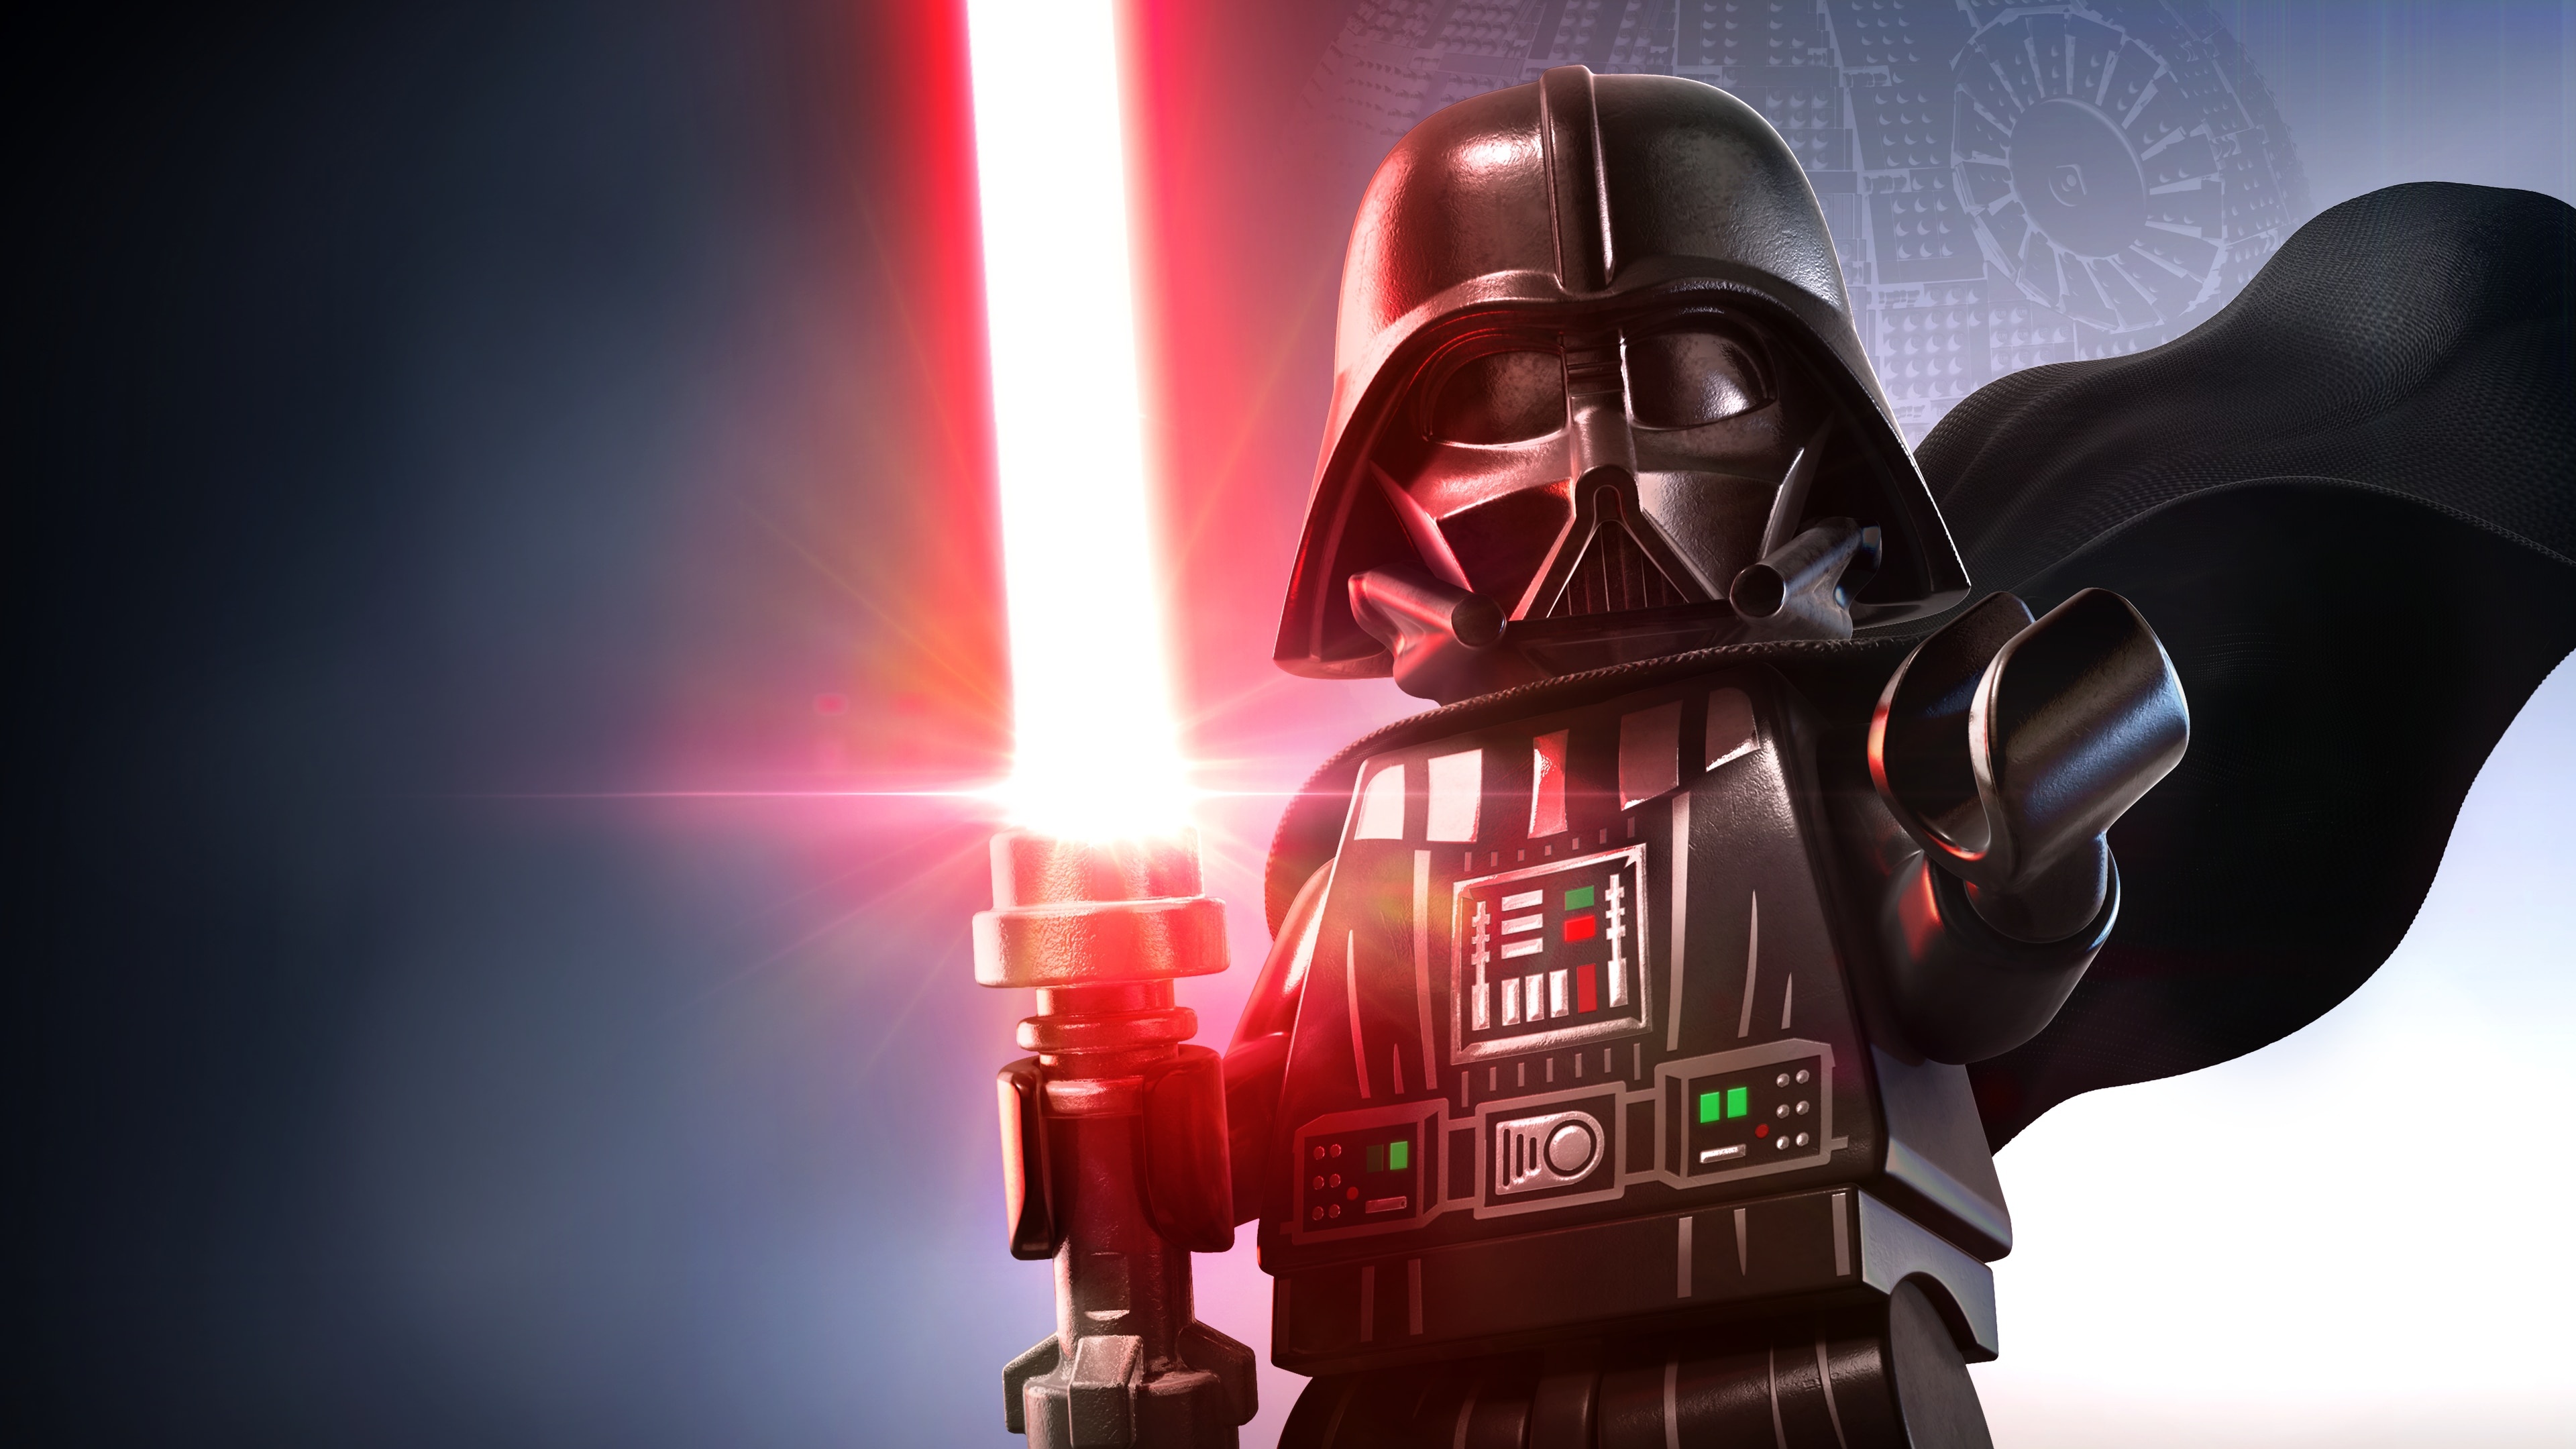 PlayStation gaming, PS5 experience, LEGO Star Wars adventure, Exclusive content, 3840x2160 4K Desktop